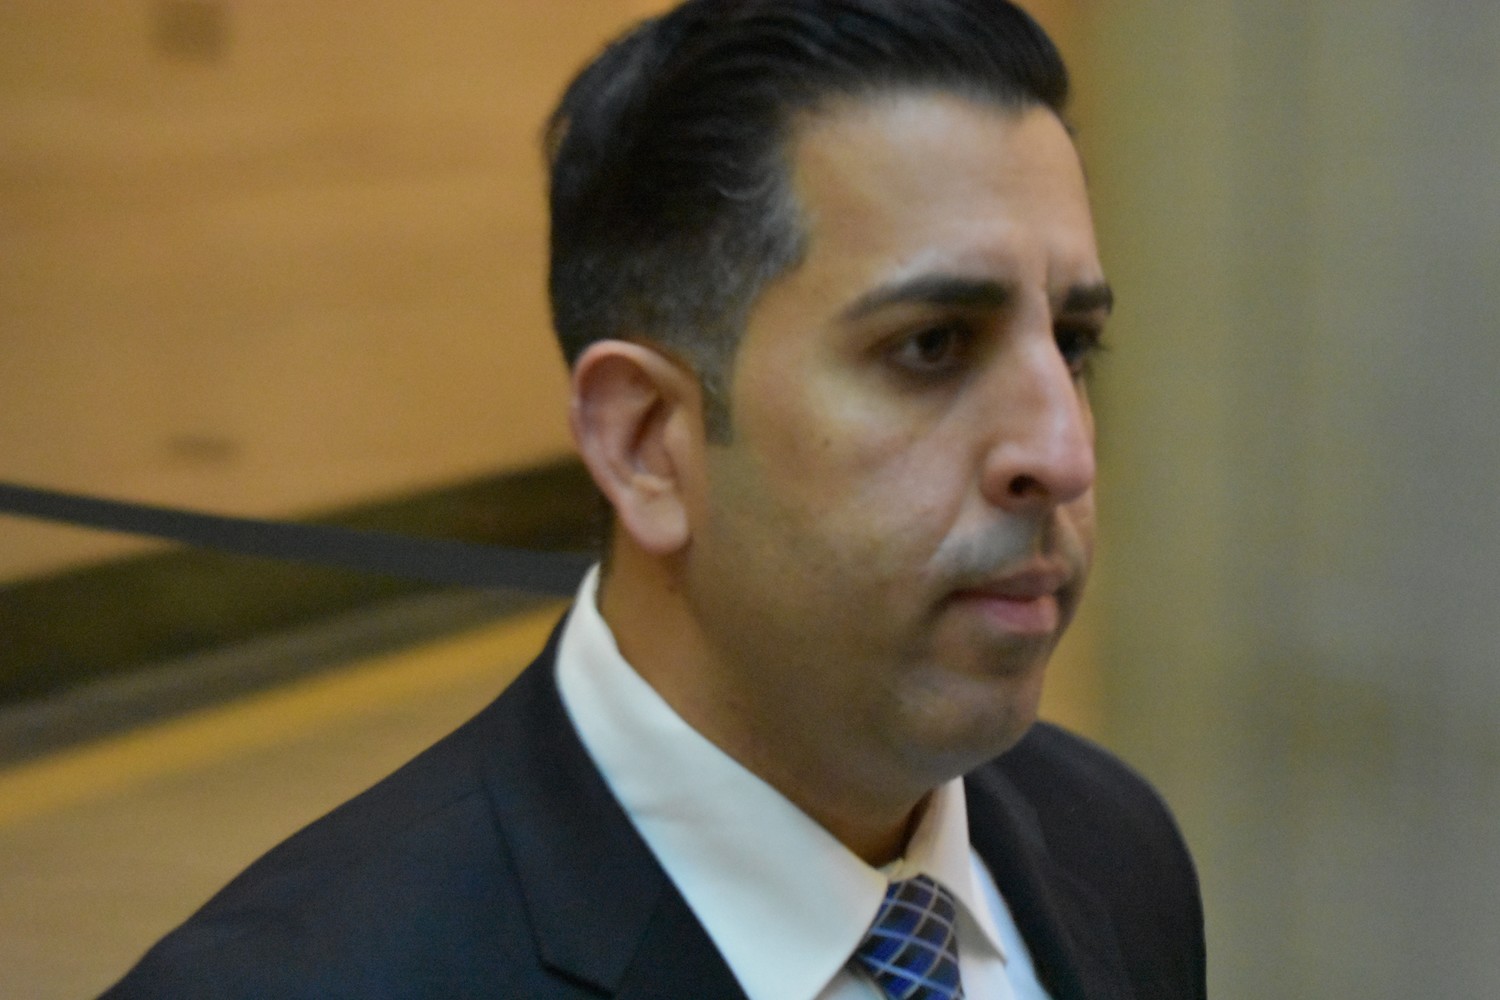 Rockville Centre Police Officer Anthony Federico walked out of the courtroom at the Nassau County Courthouse in Mineola on Wednesday after Day One of his trial wrapped up.